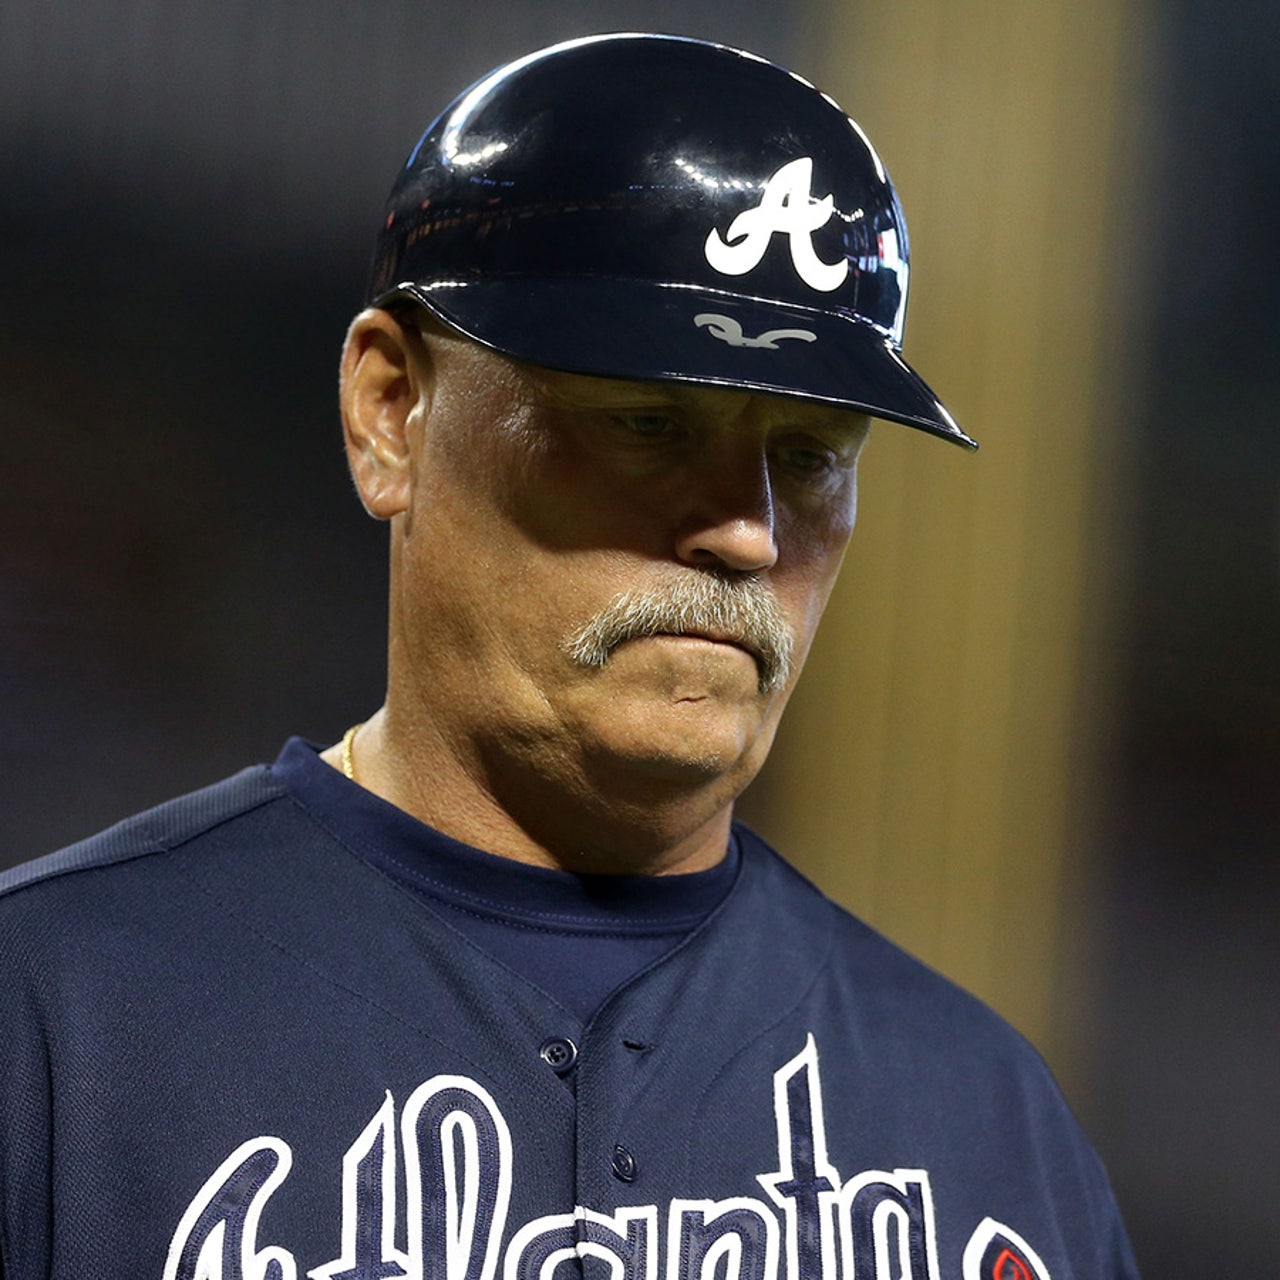 Braves: Brian Snitker is approaching franchise greatness 